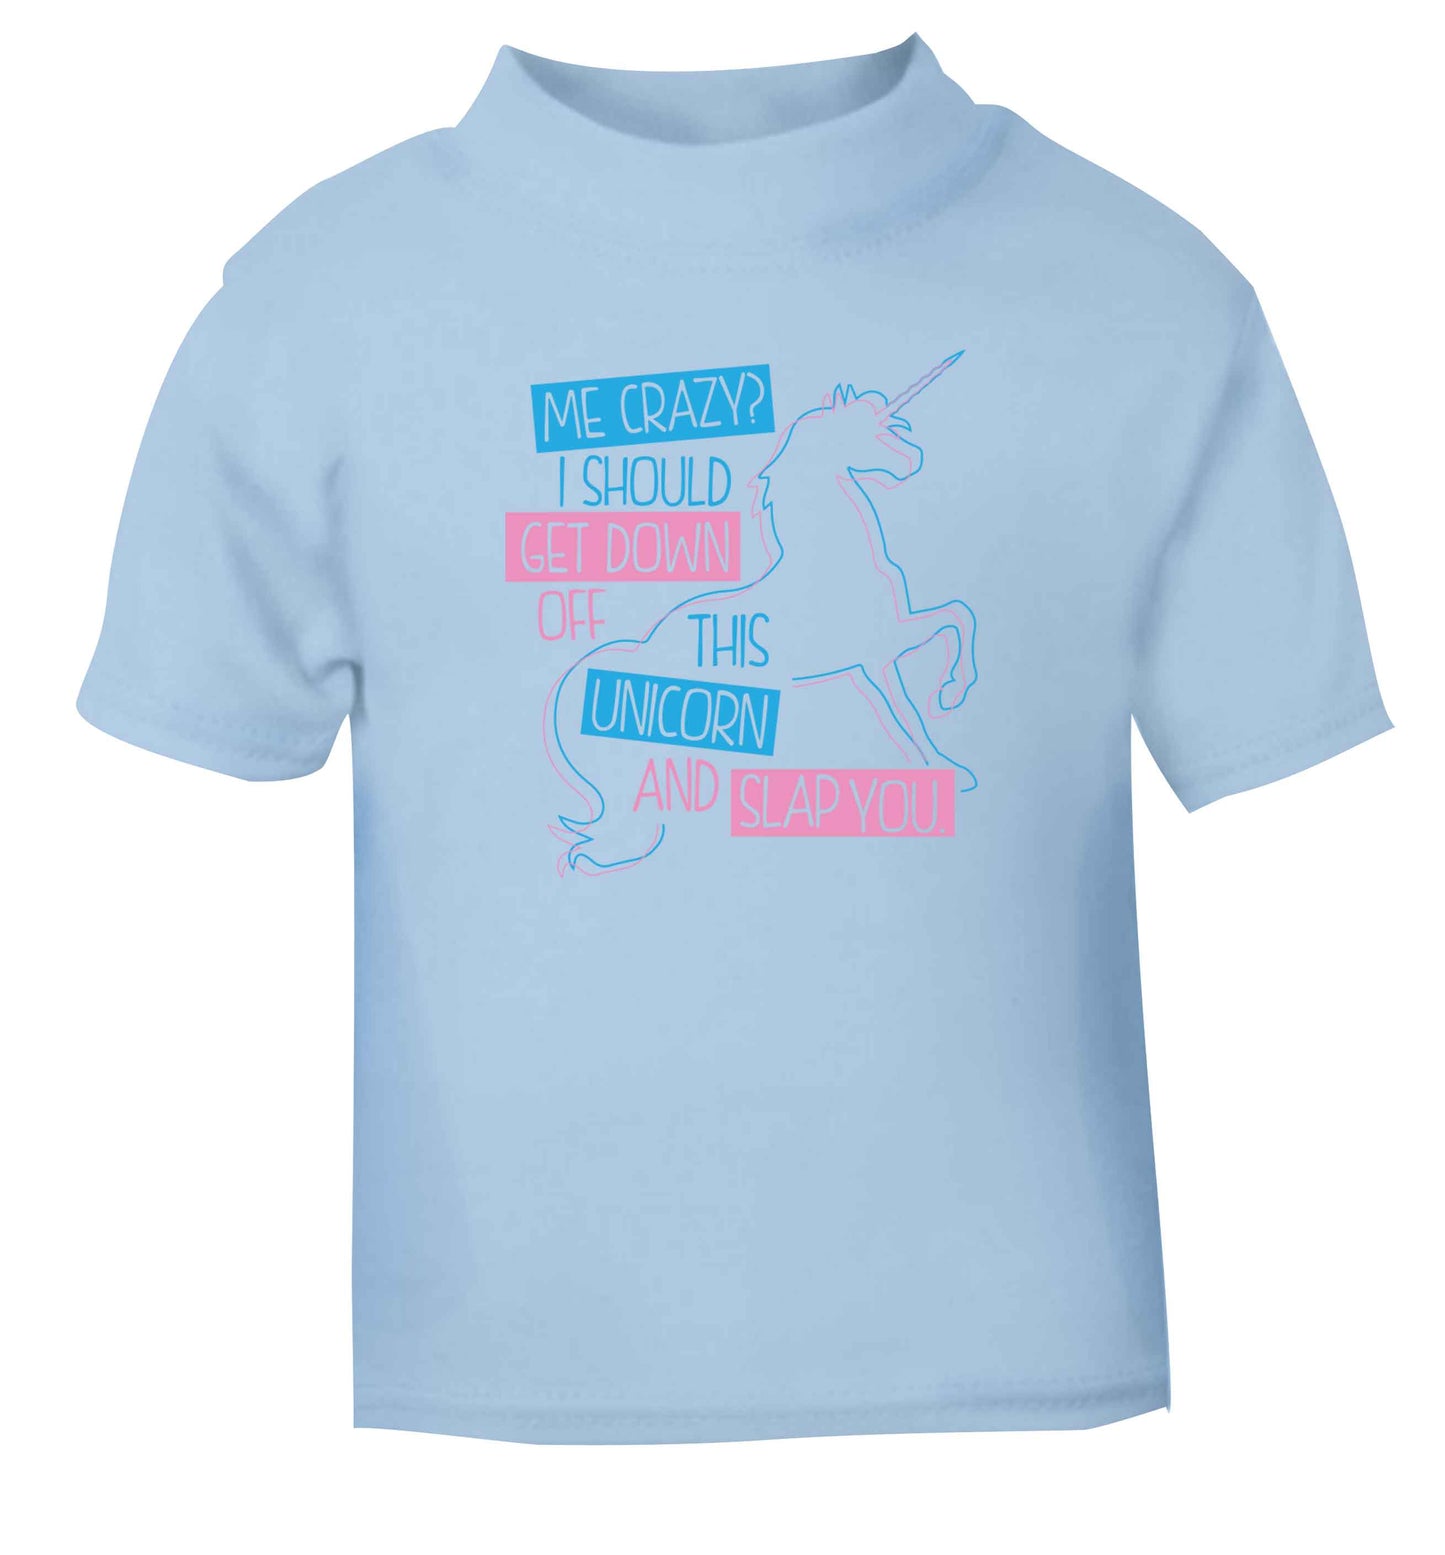 Me crazy? I should get down off this unicorn and slap you light blue Baby Toddler Tshirt 2 Years